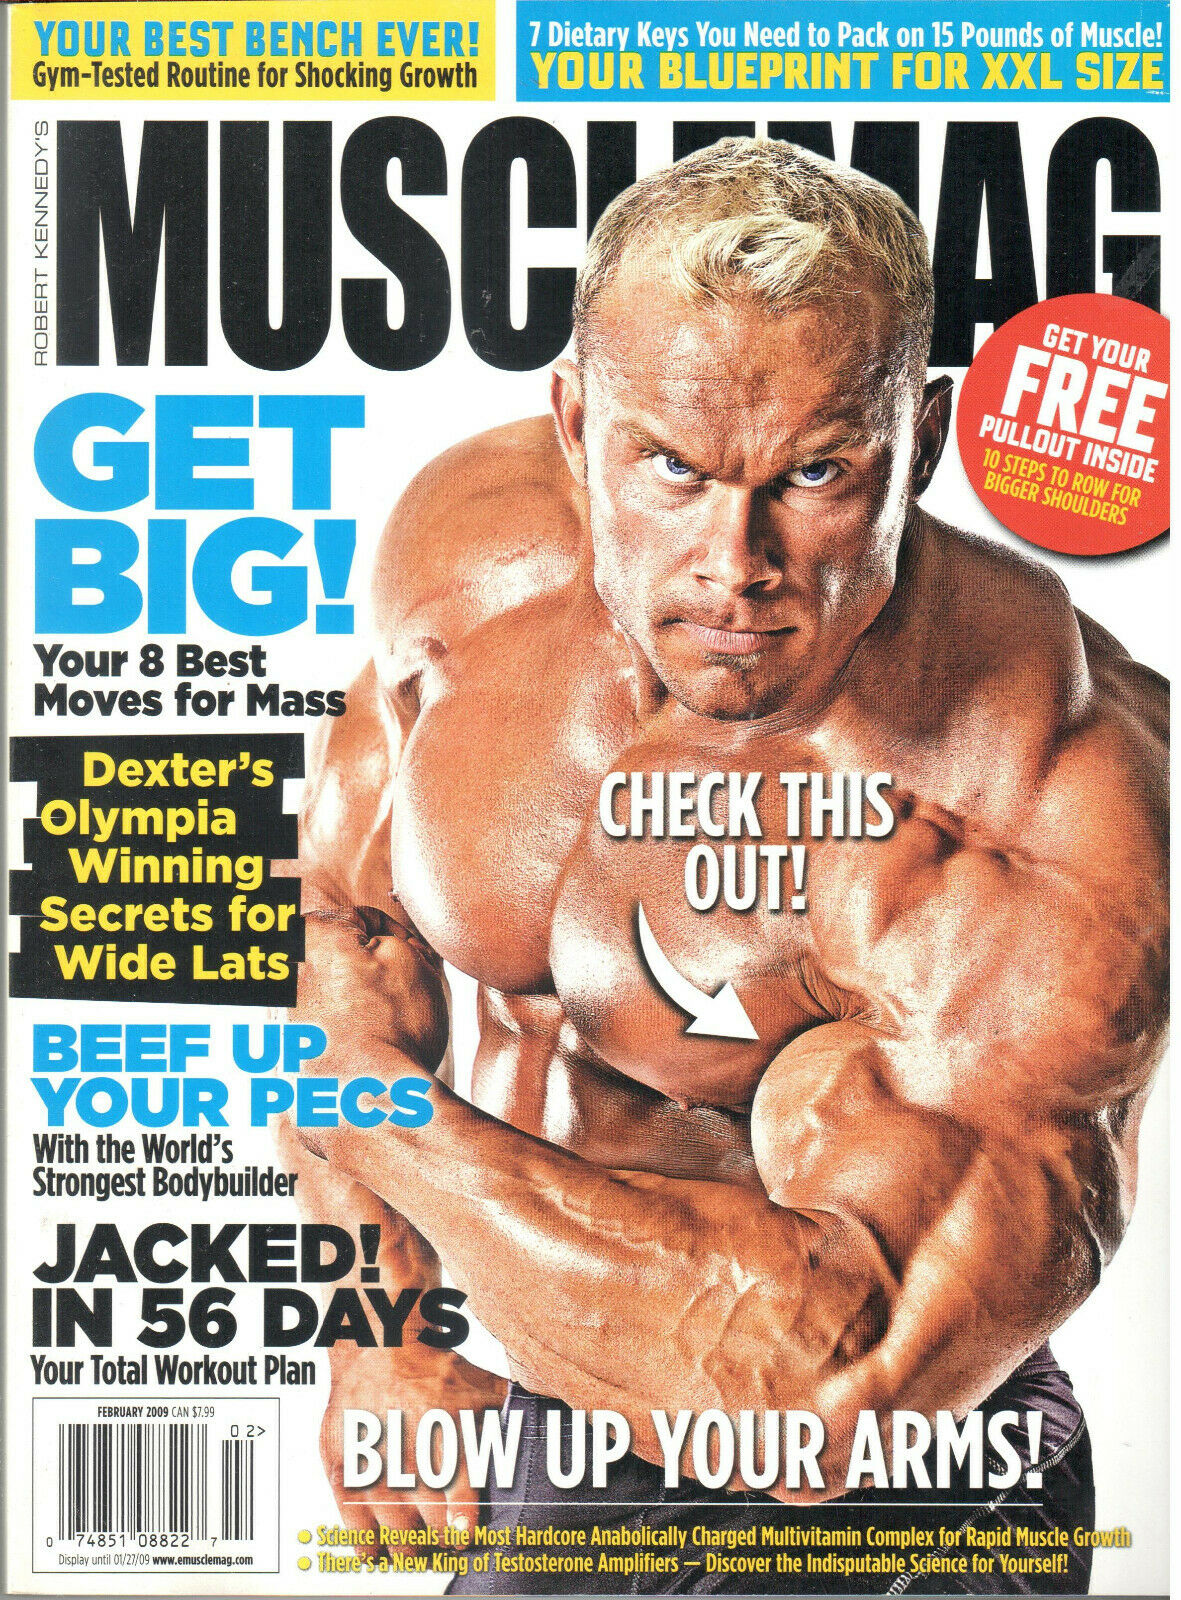 Muscle Mag February 2009 magazine back issue Muscle Mag magizine back copy Muscle Mag February 2009 Bodybuilding and Fitness Magazine Back Issue Published by Canadian Robert Kennedy and Founded in 1974. Your Best Bench Ever! Gym-Tested Routine For Shocking Growth.